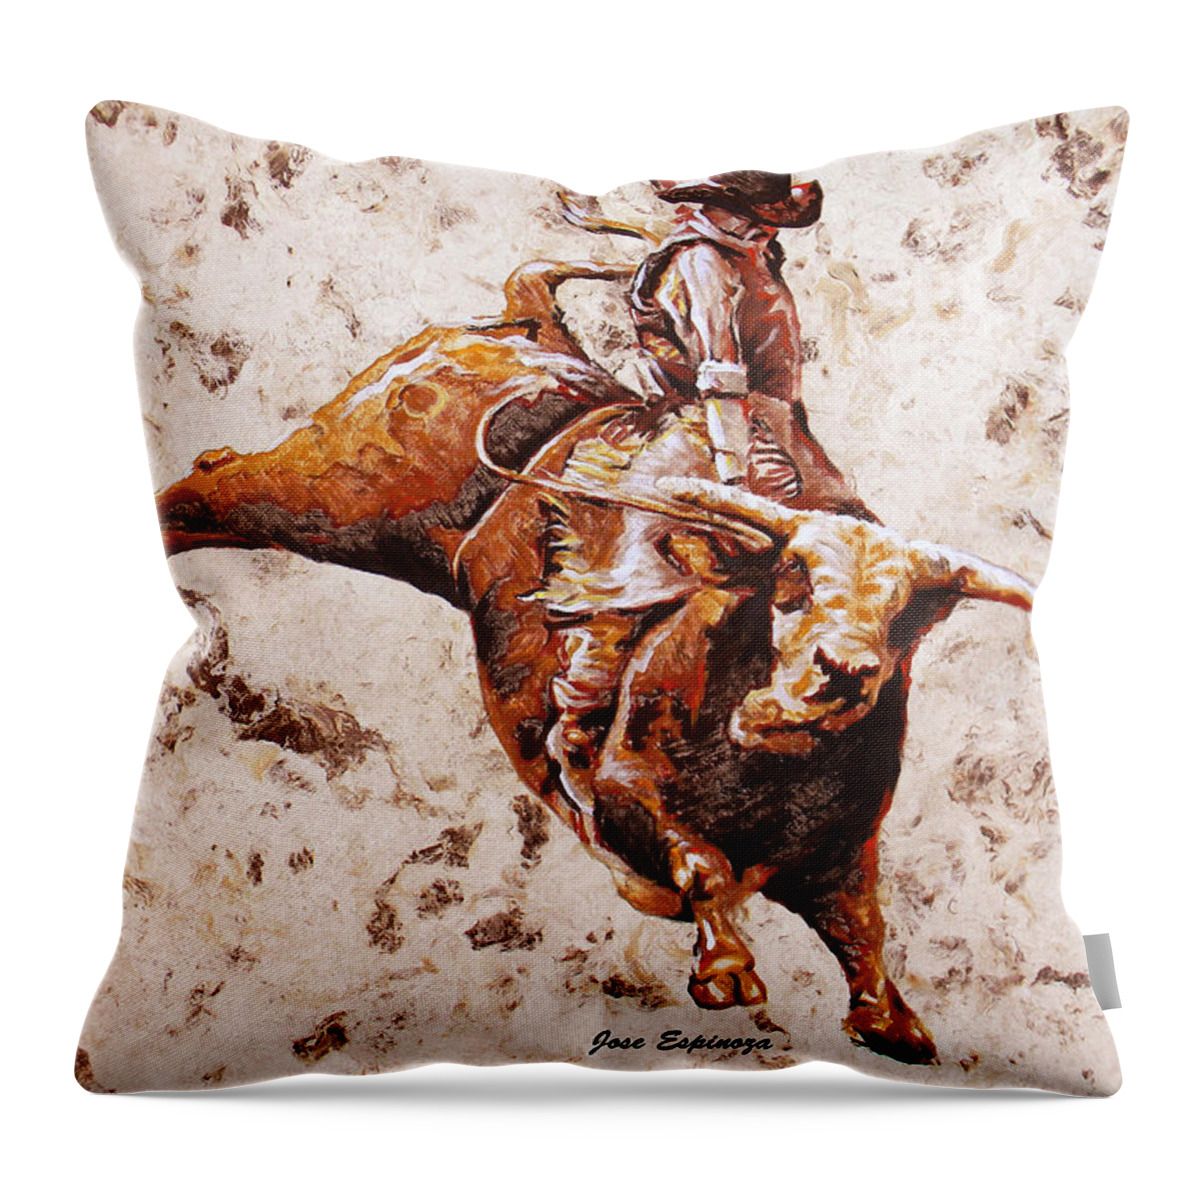 Rodeo Throw Pillow featuring the painting R O D E O' S . K I N G by J U A N - O A X A C A